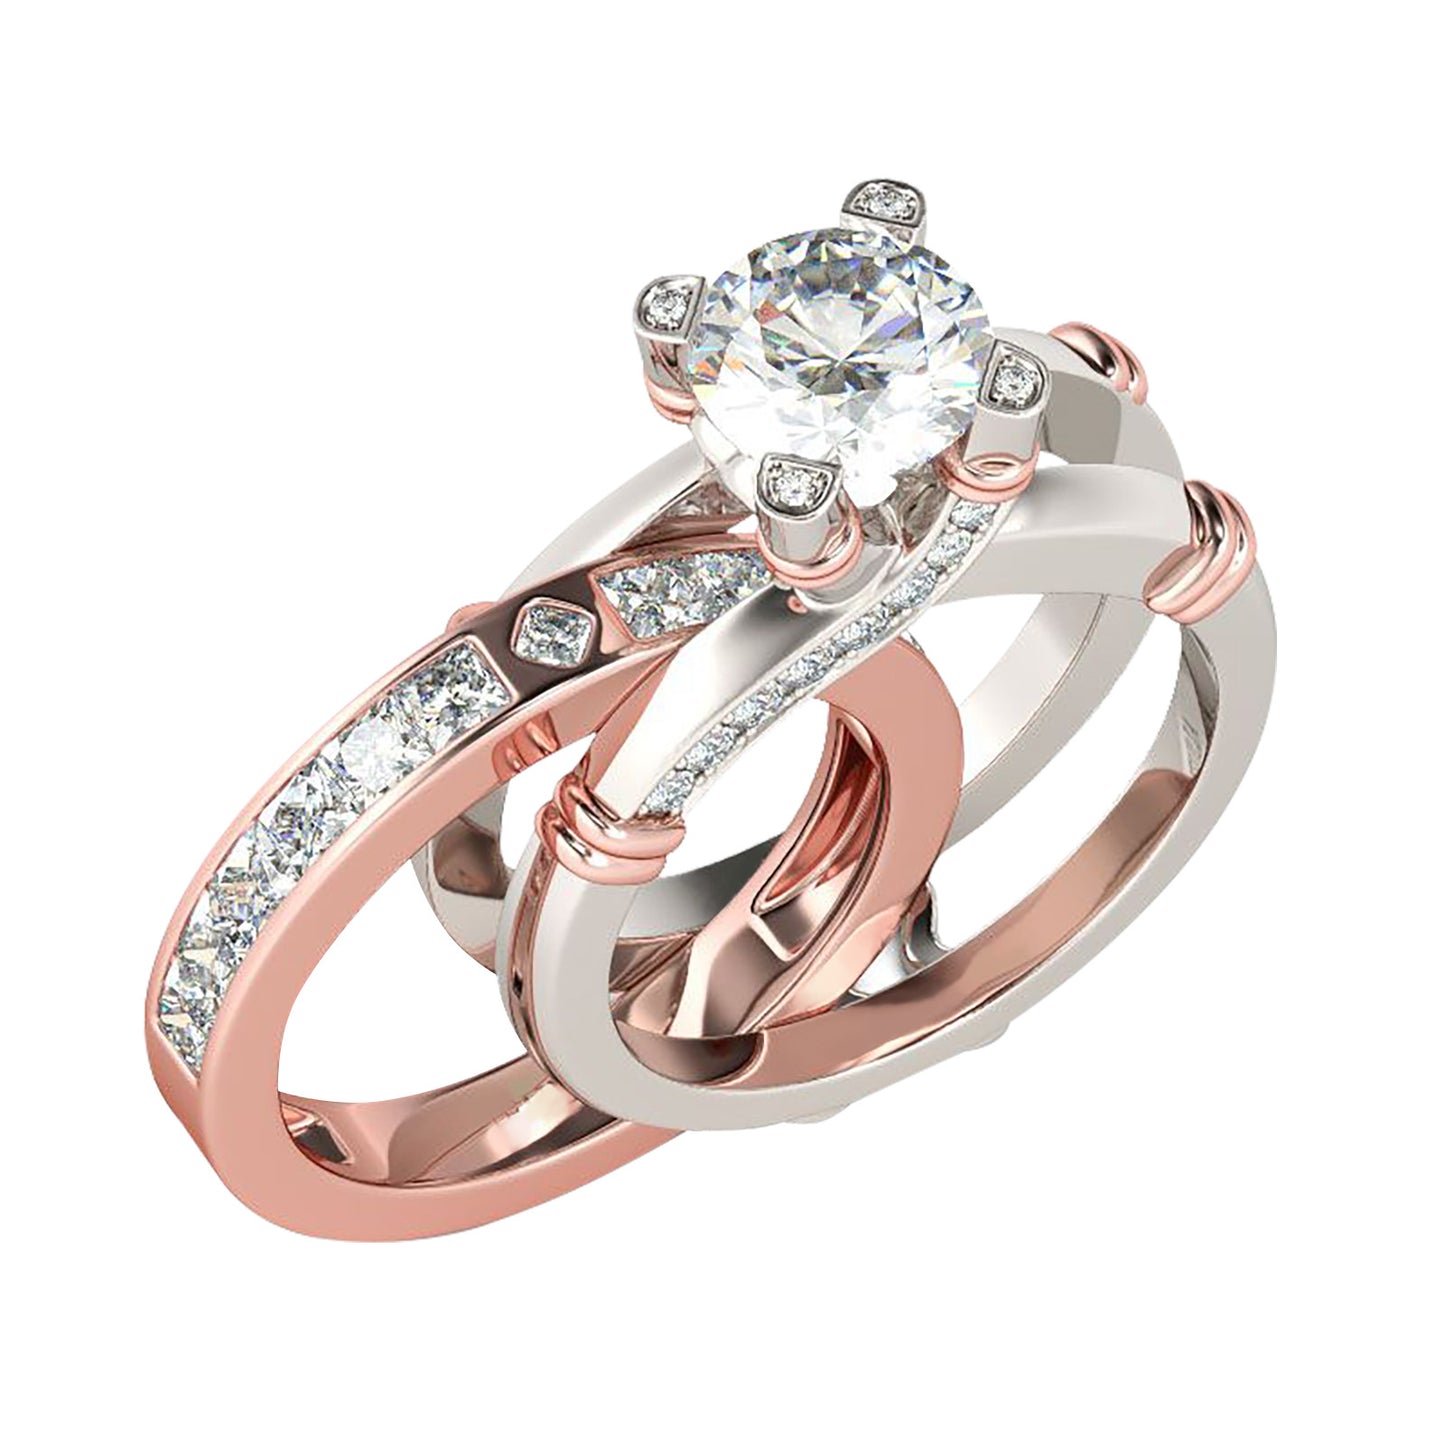 Set Of Rings With Diamonds, All-Match Three-Color Ring - ladieskits - luxury rings